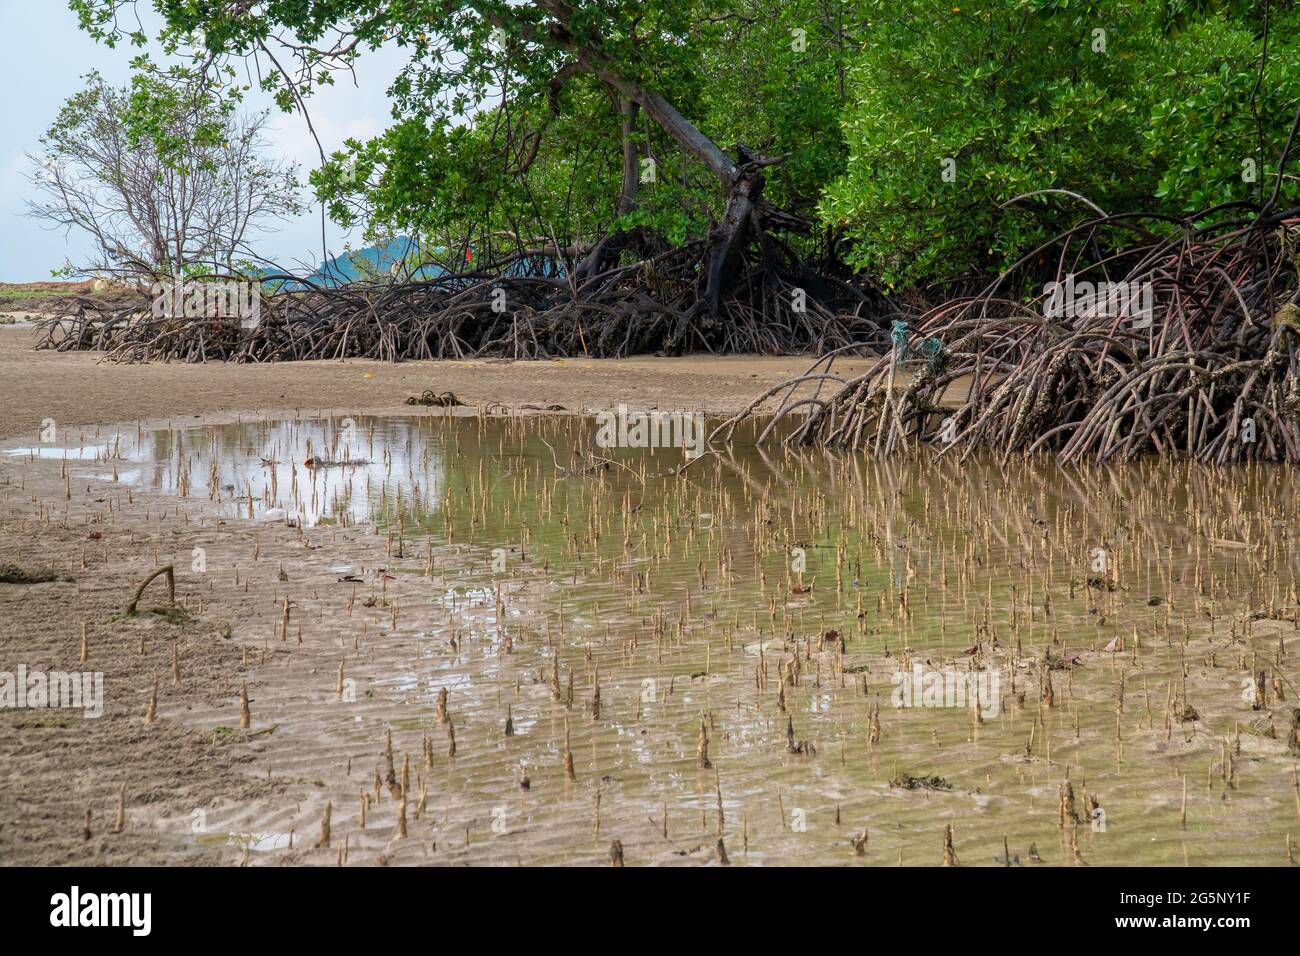 Tropical mangrove forest trees, roots, pneumatophores and aerial roots at low tide water beach, Endau, Malaysia Stock Photo